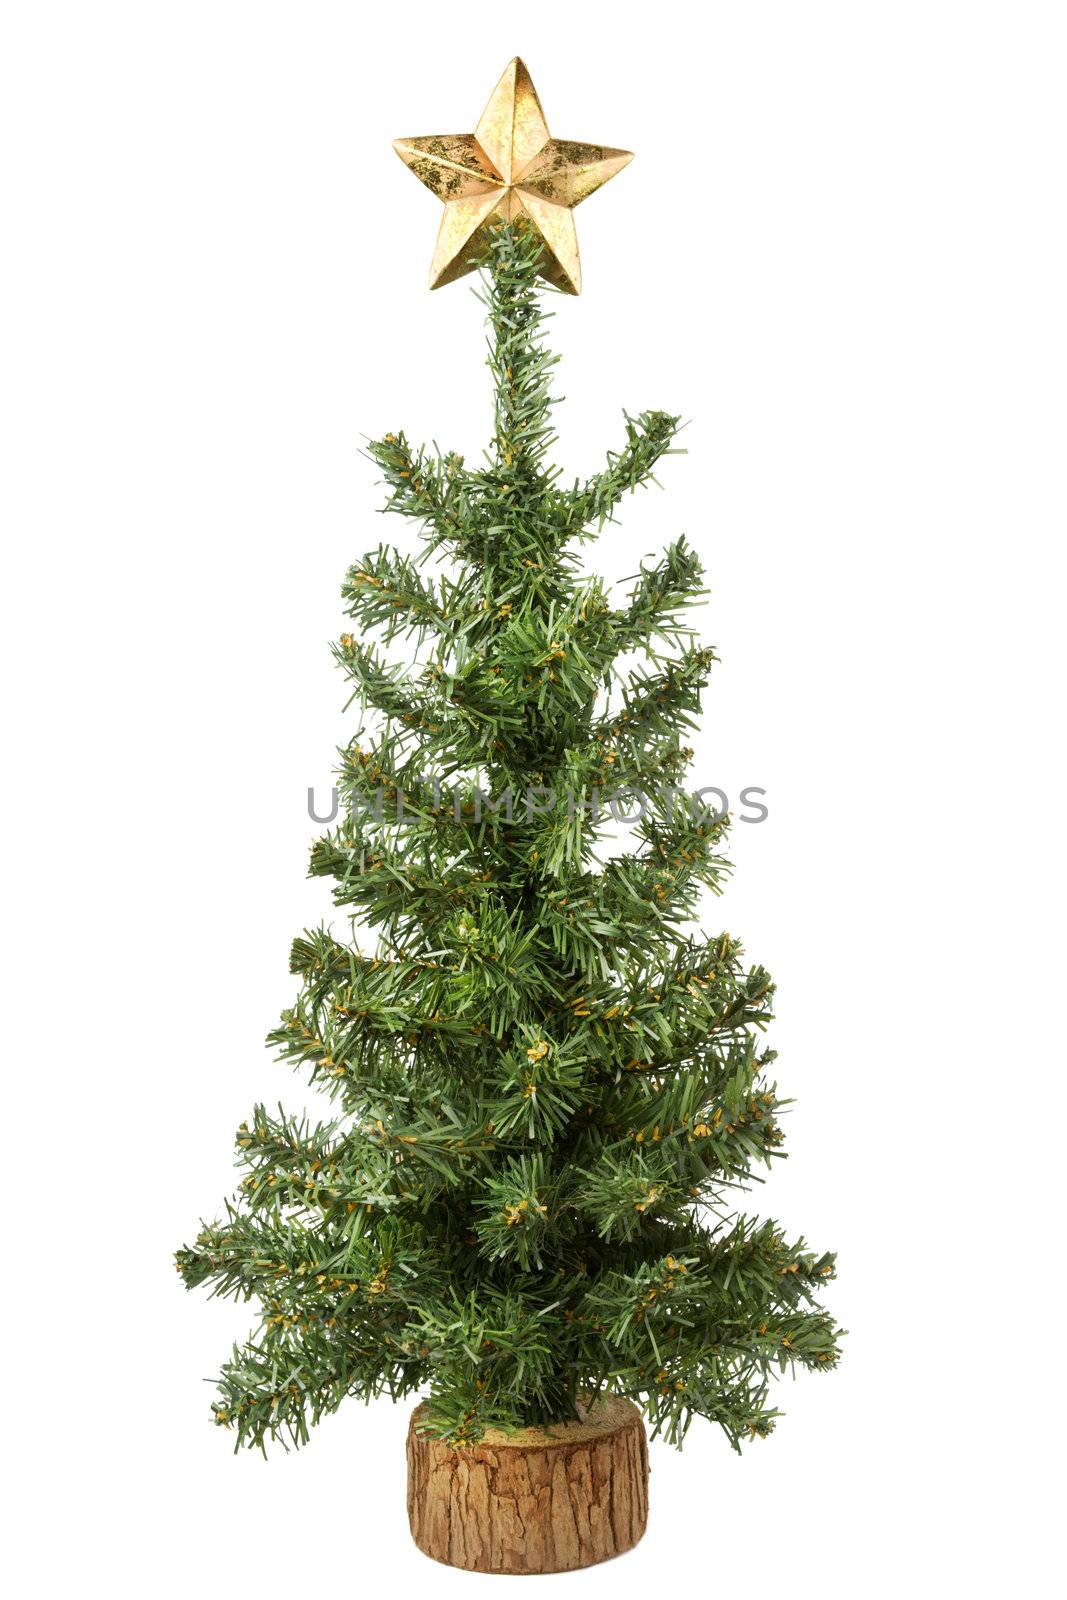 Christmas tree with star isolated on white background